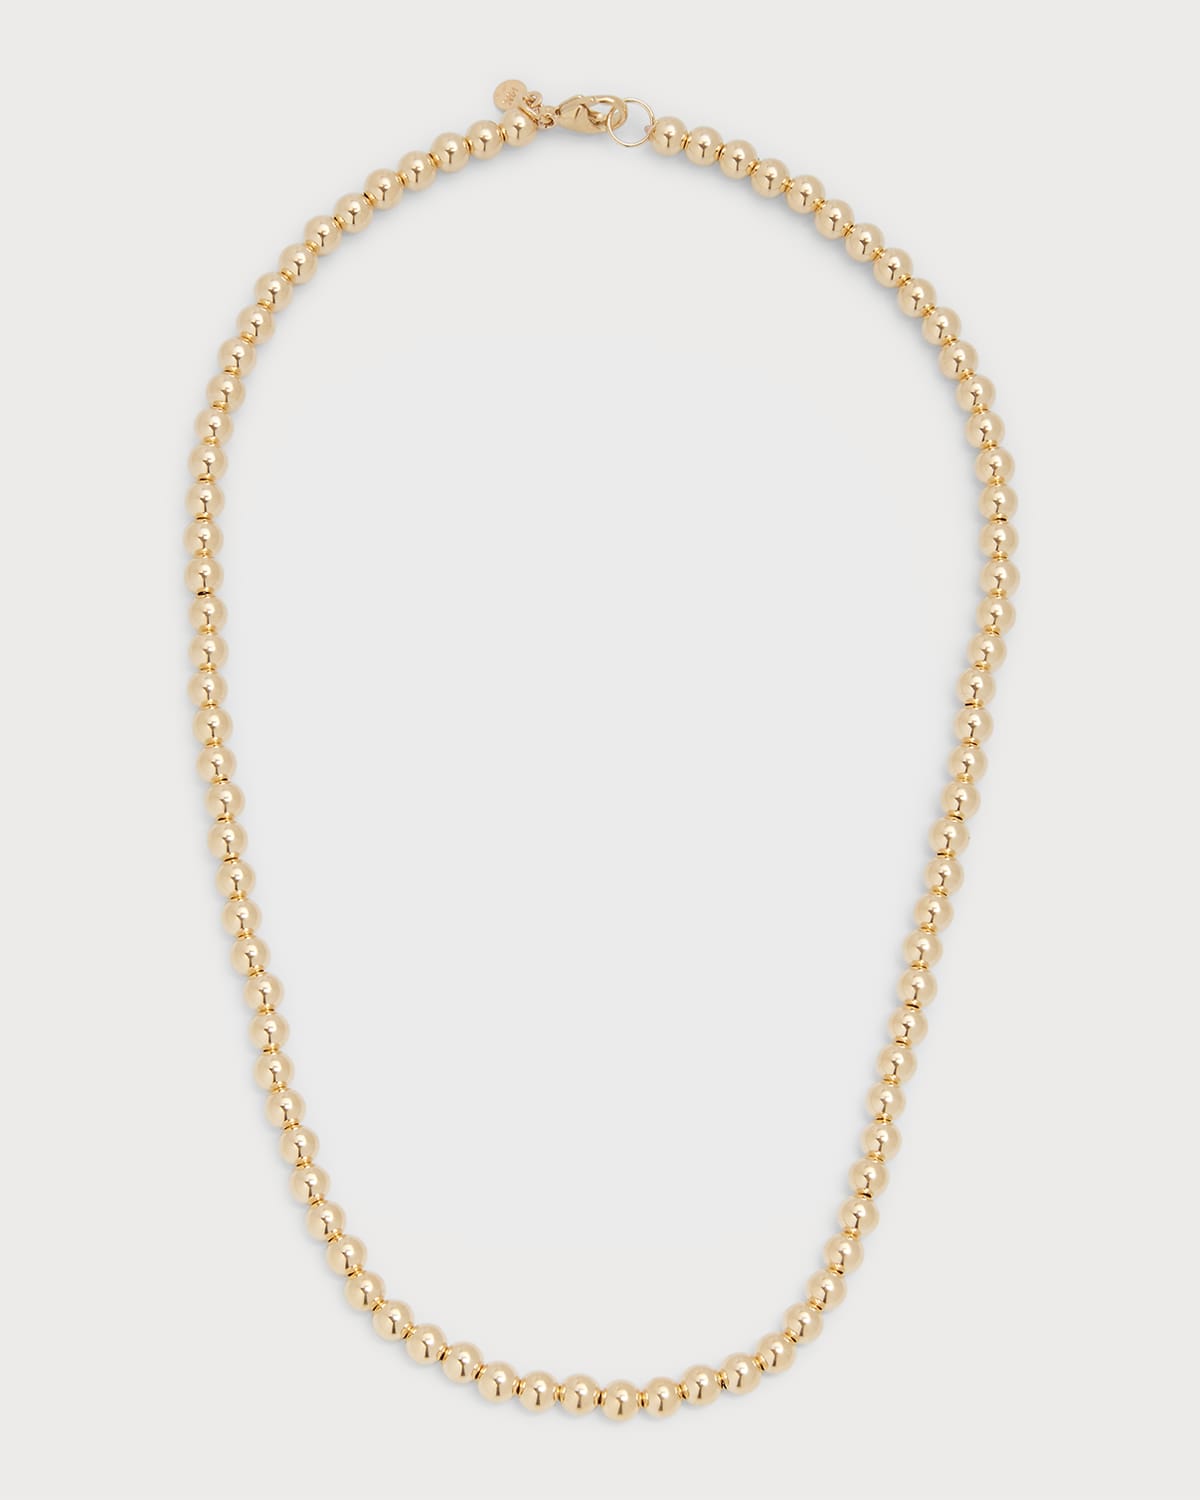 ADD ON PEARL NECKLACE 5MM 14K GOLD CHAIN A FAMILY TRADITION 